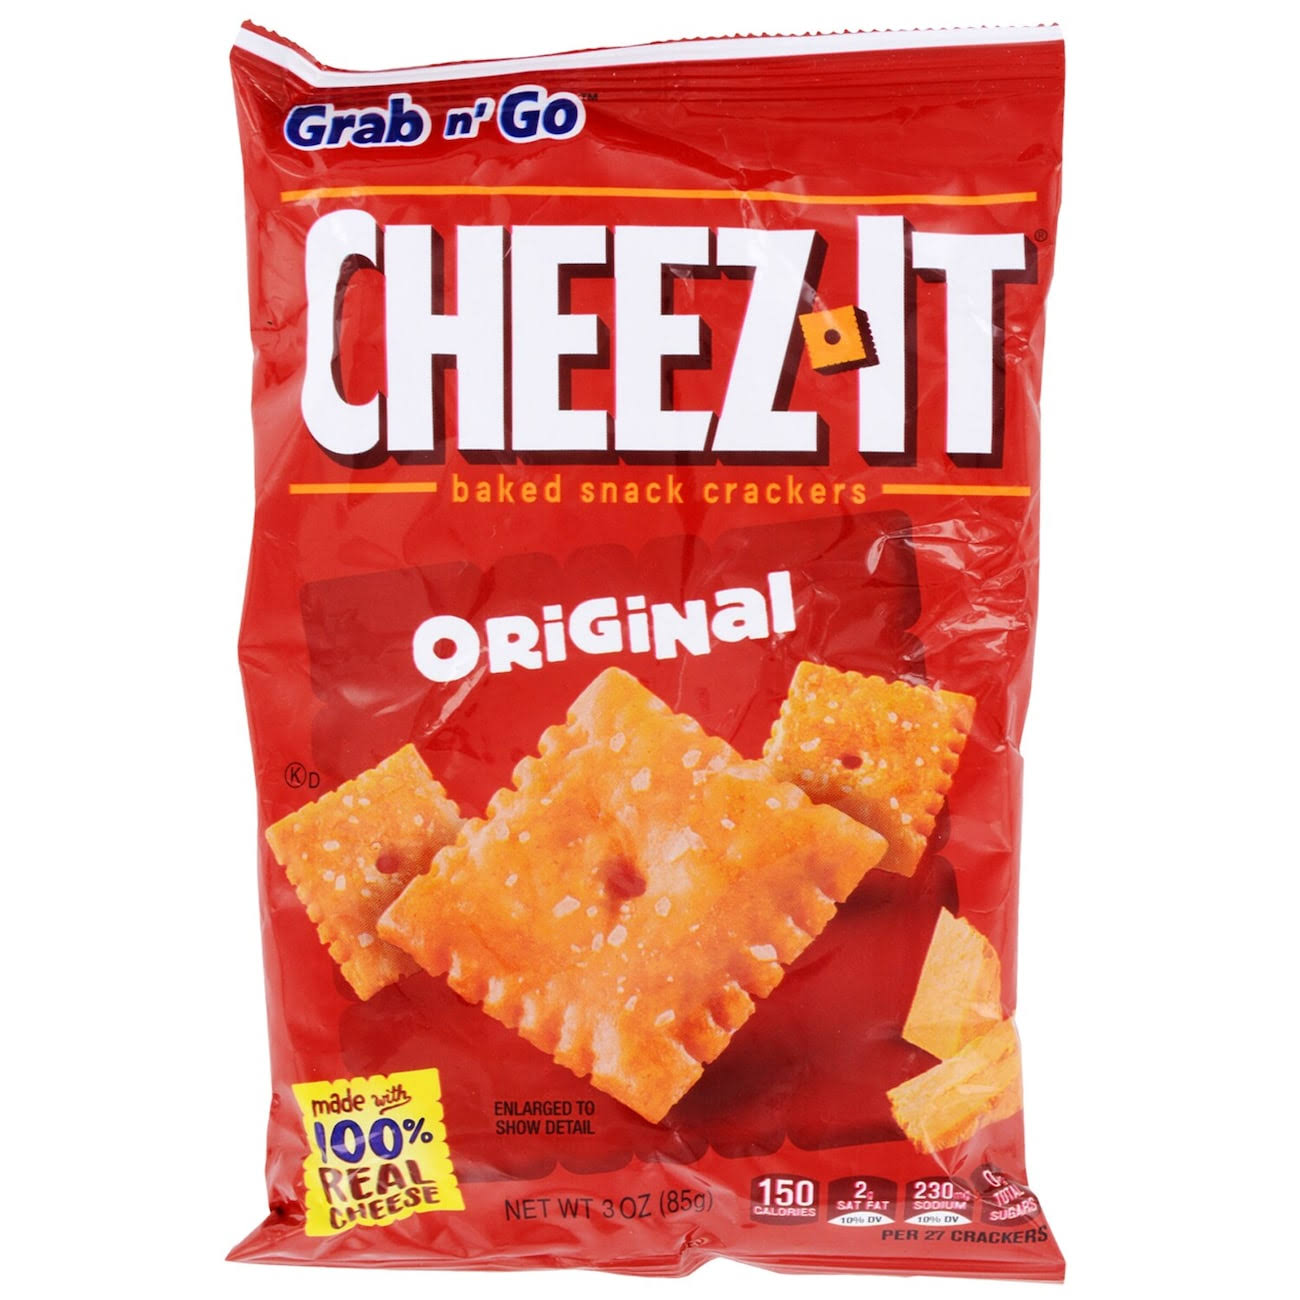 Sunshine Cheez-It Grab N' Go Baked Snack Crackers - Cheese, 3oz